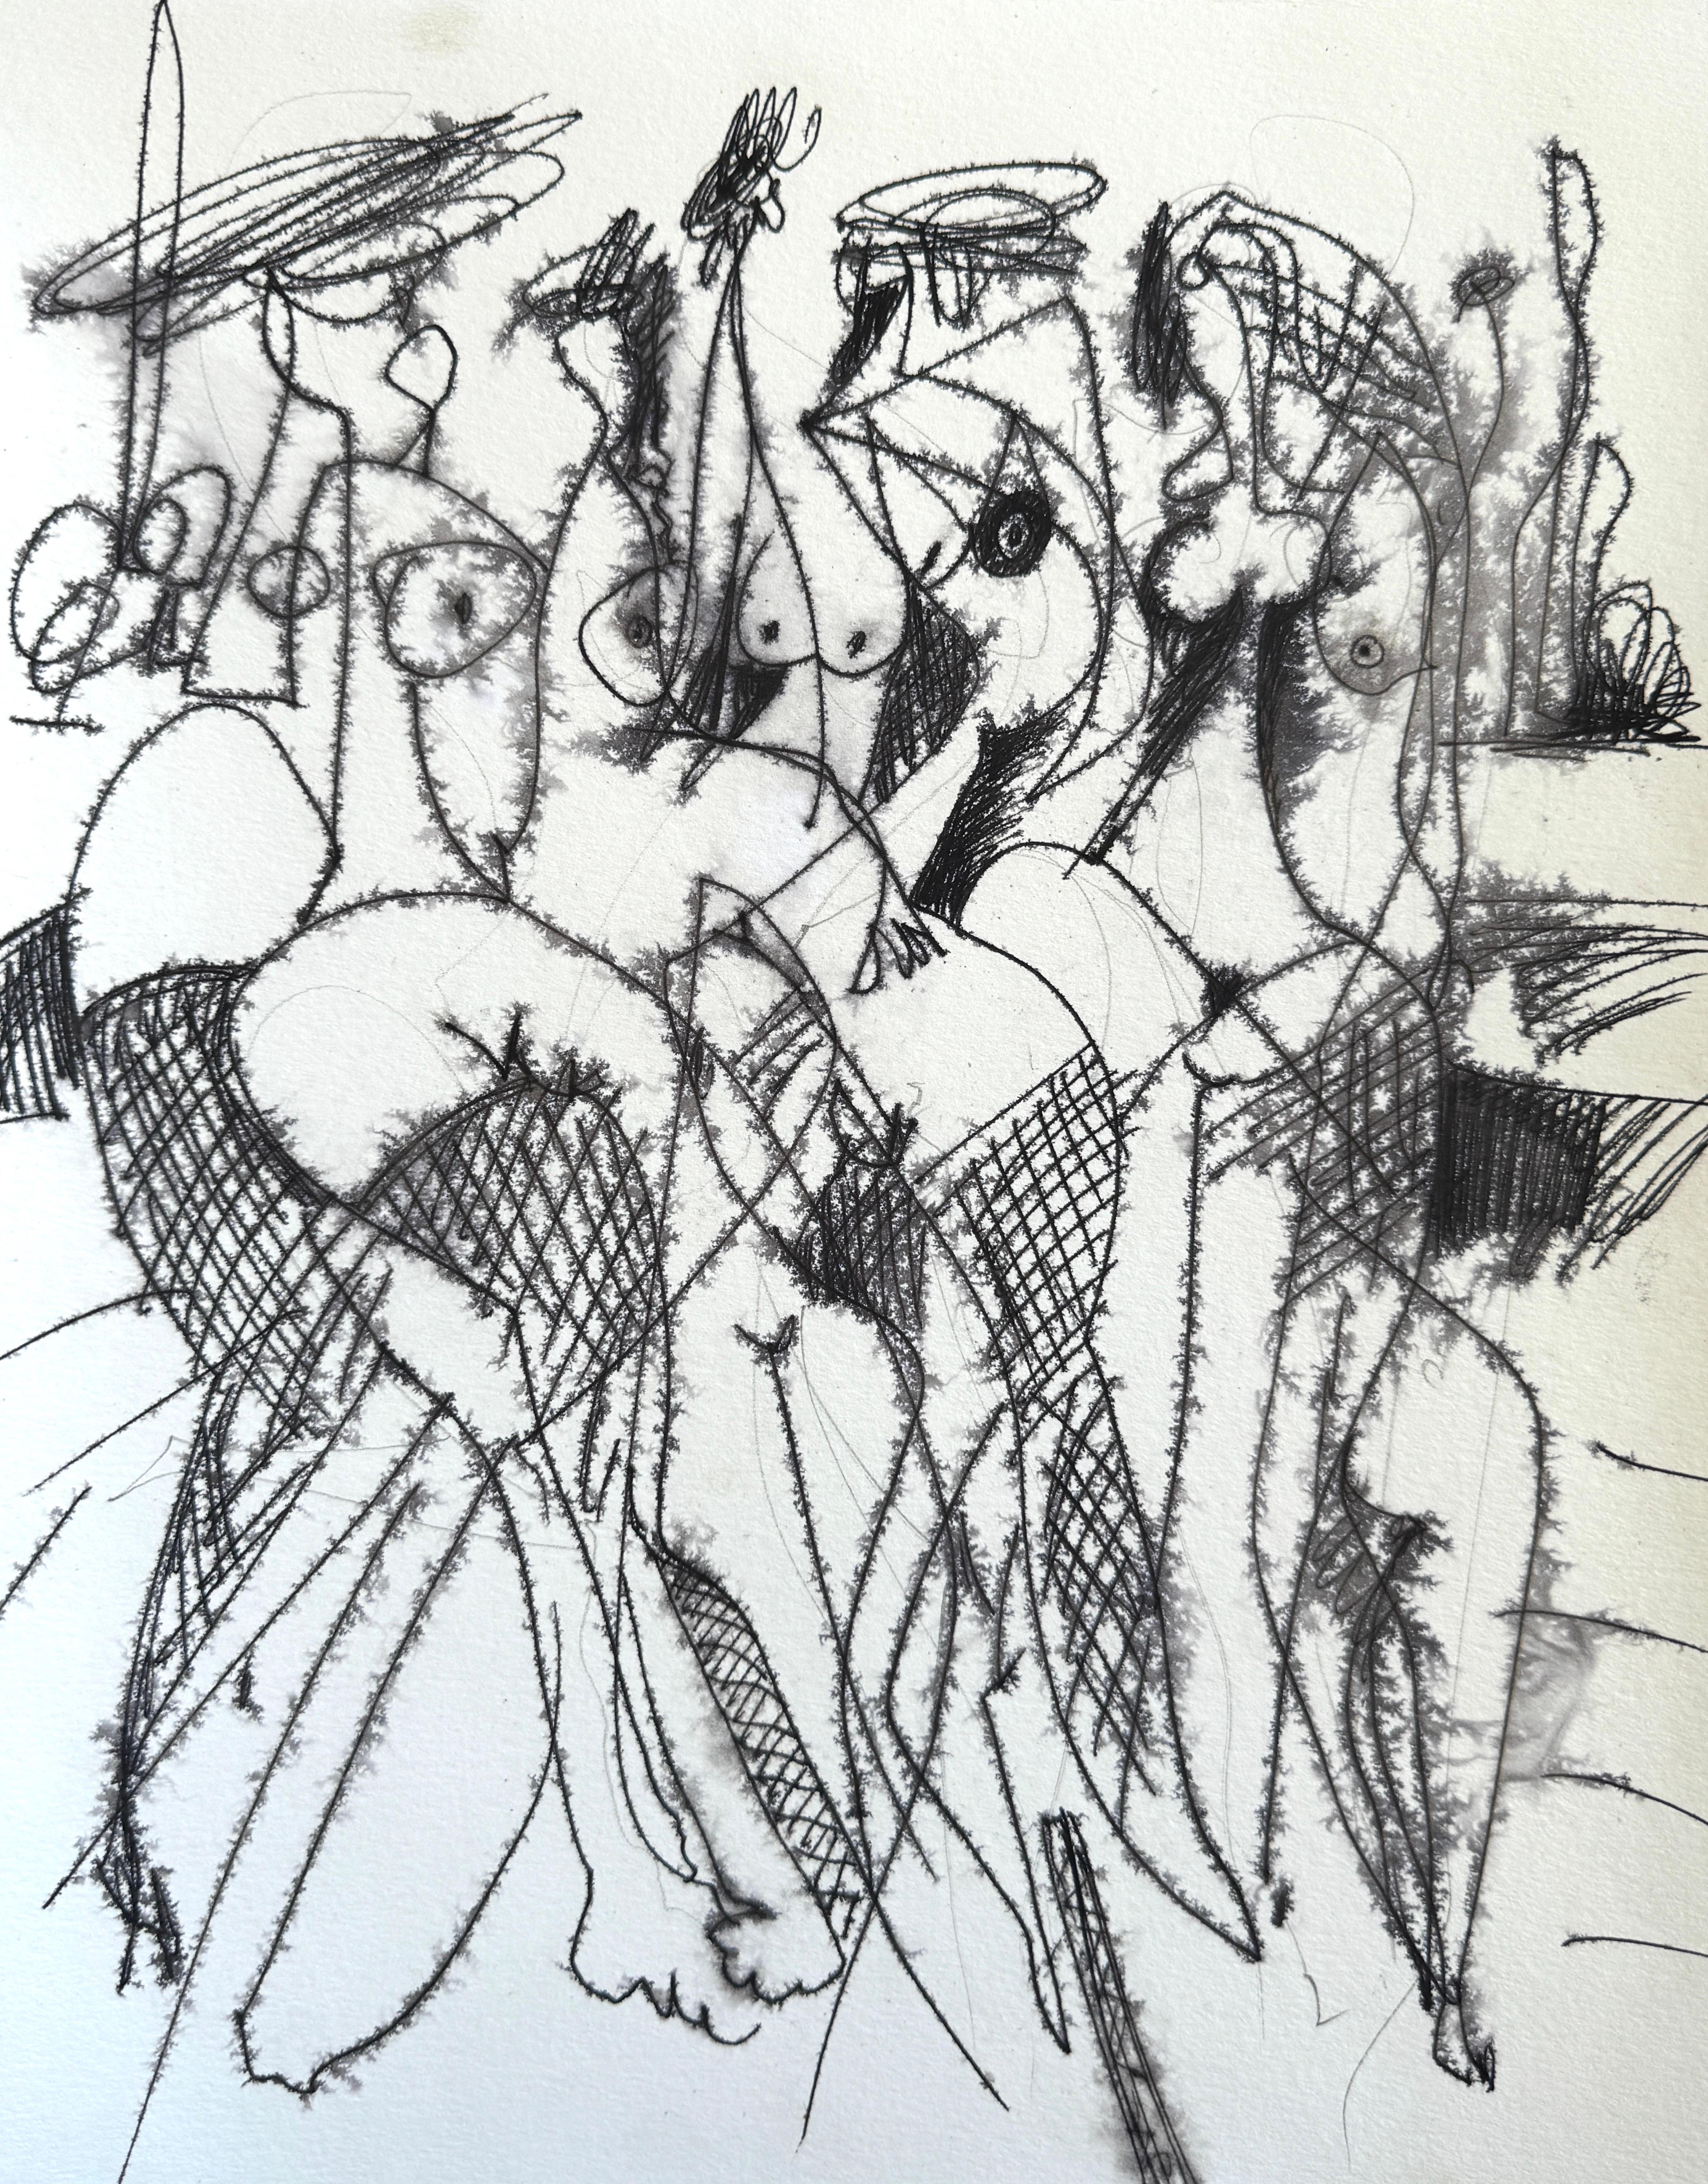 Nude, Abstract Figurative, Original, Ink Paper, Black and White 